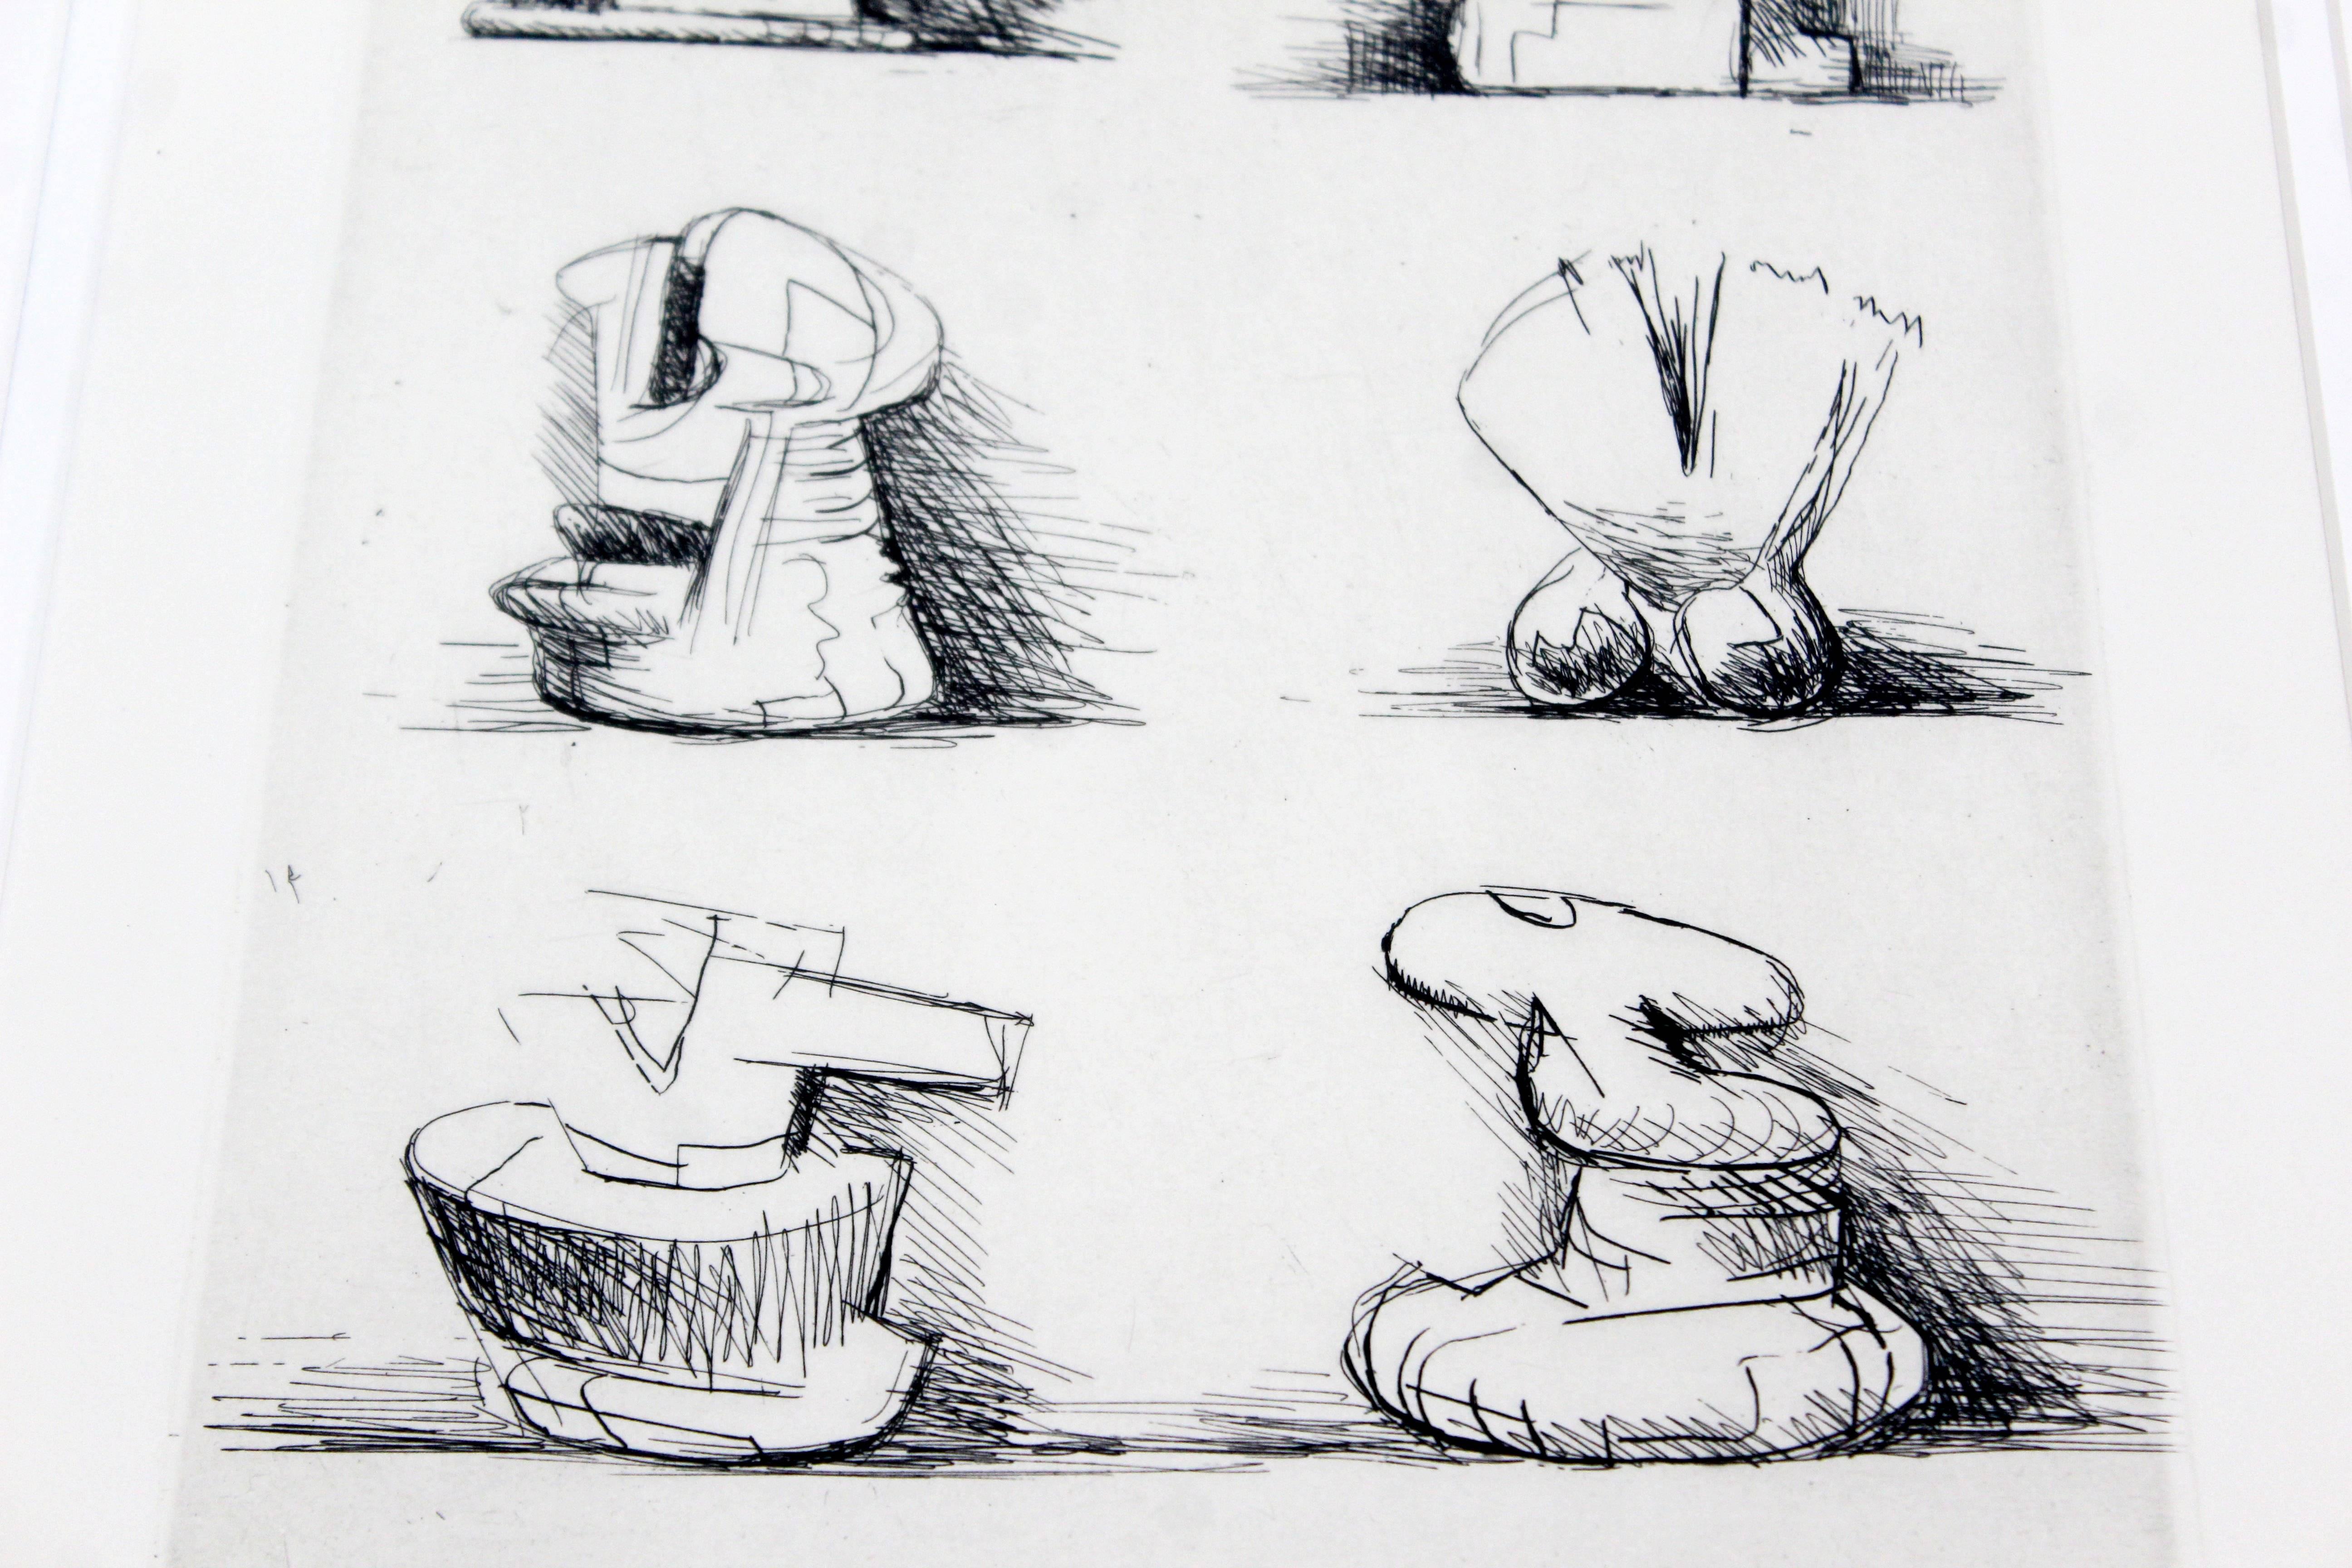 Paper Mid-Century Modern Print Six Sculpture Motives Signed by Henry Moore 182/200